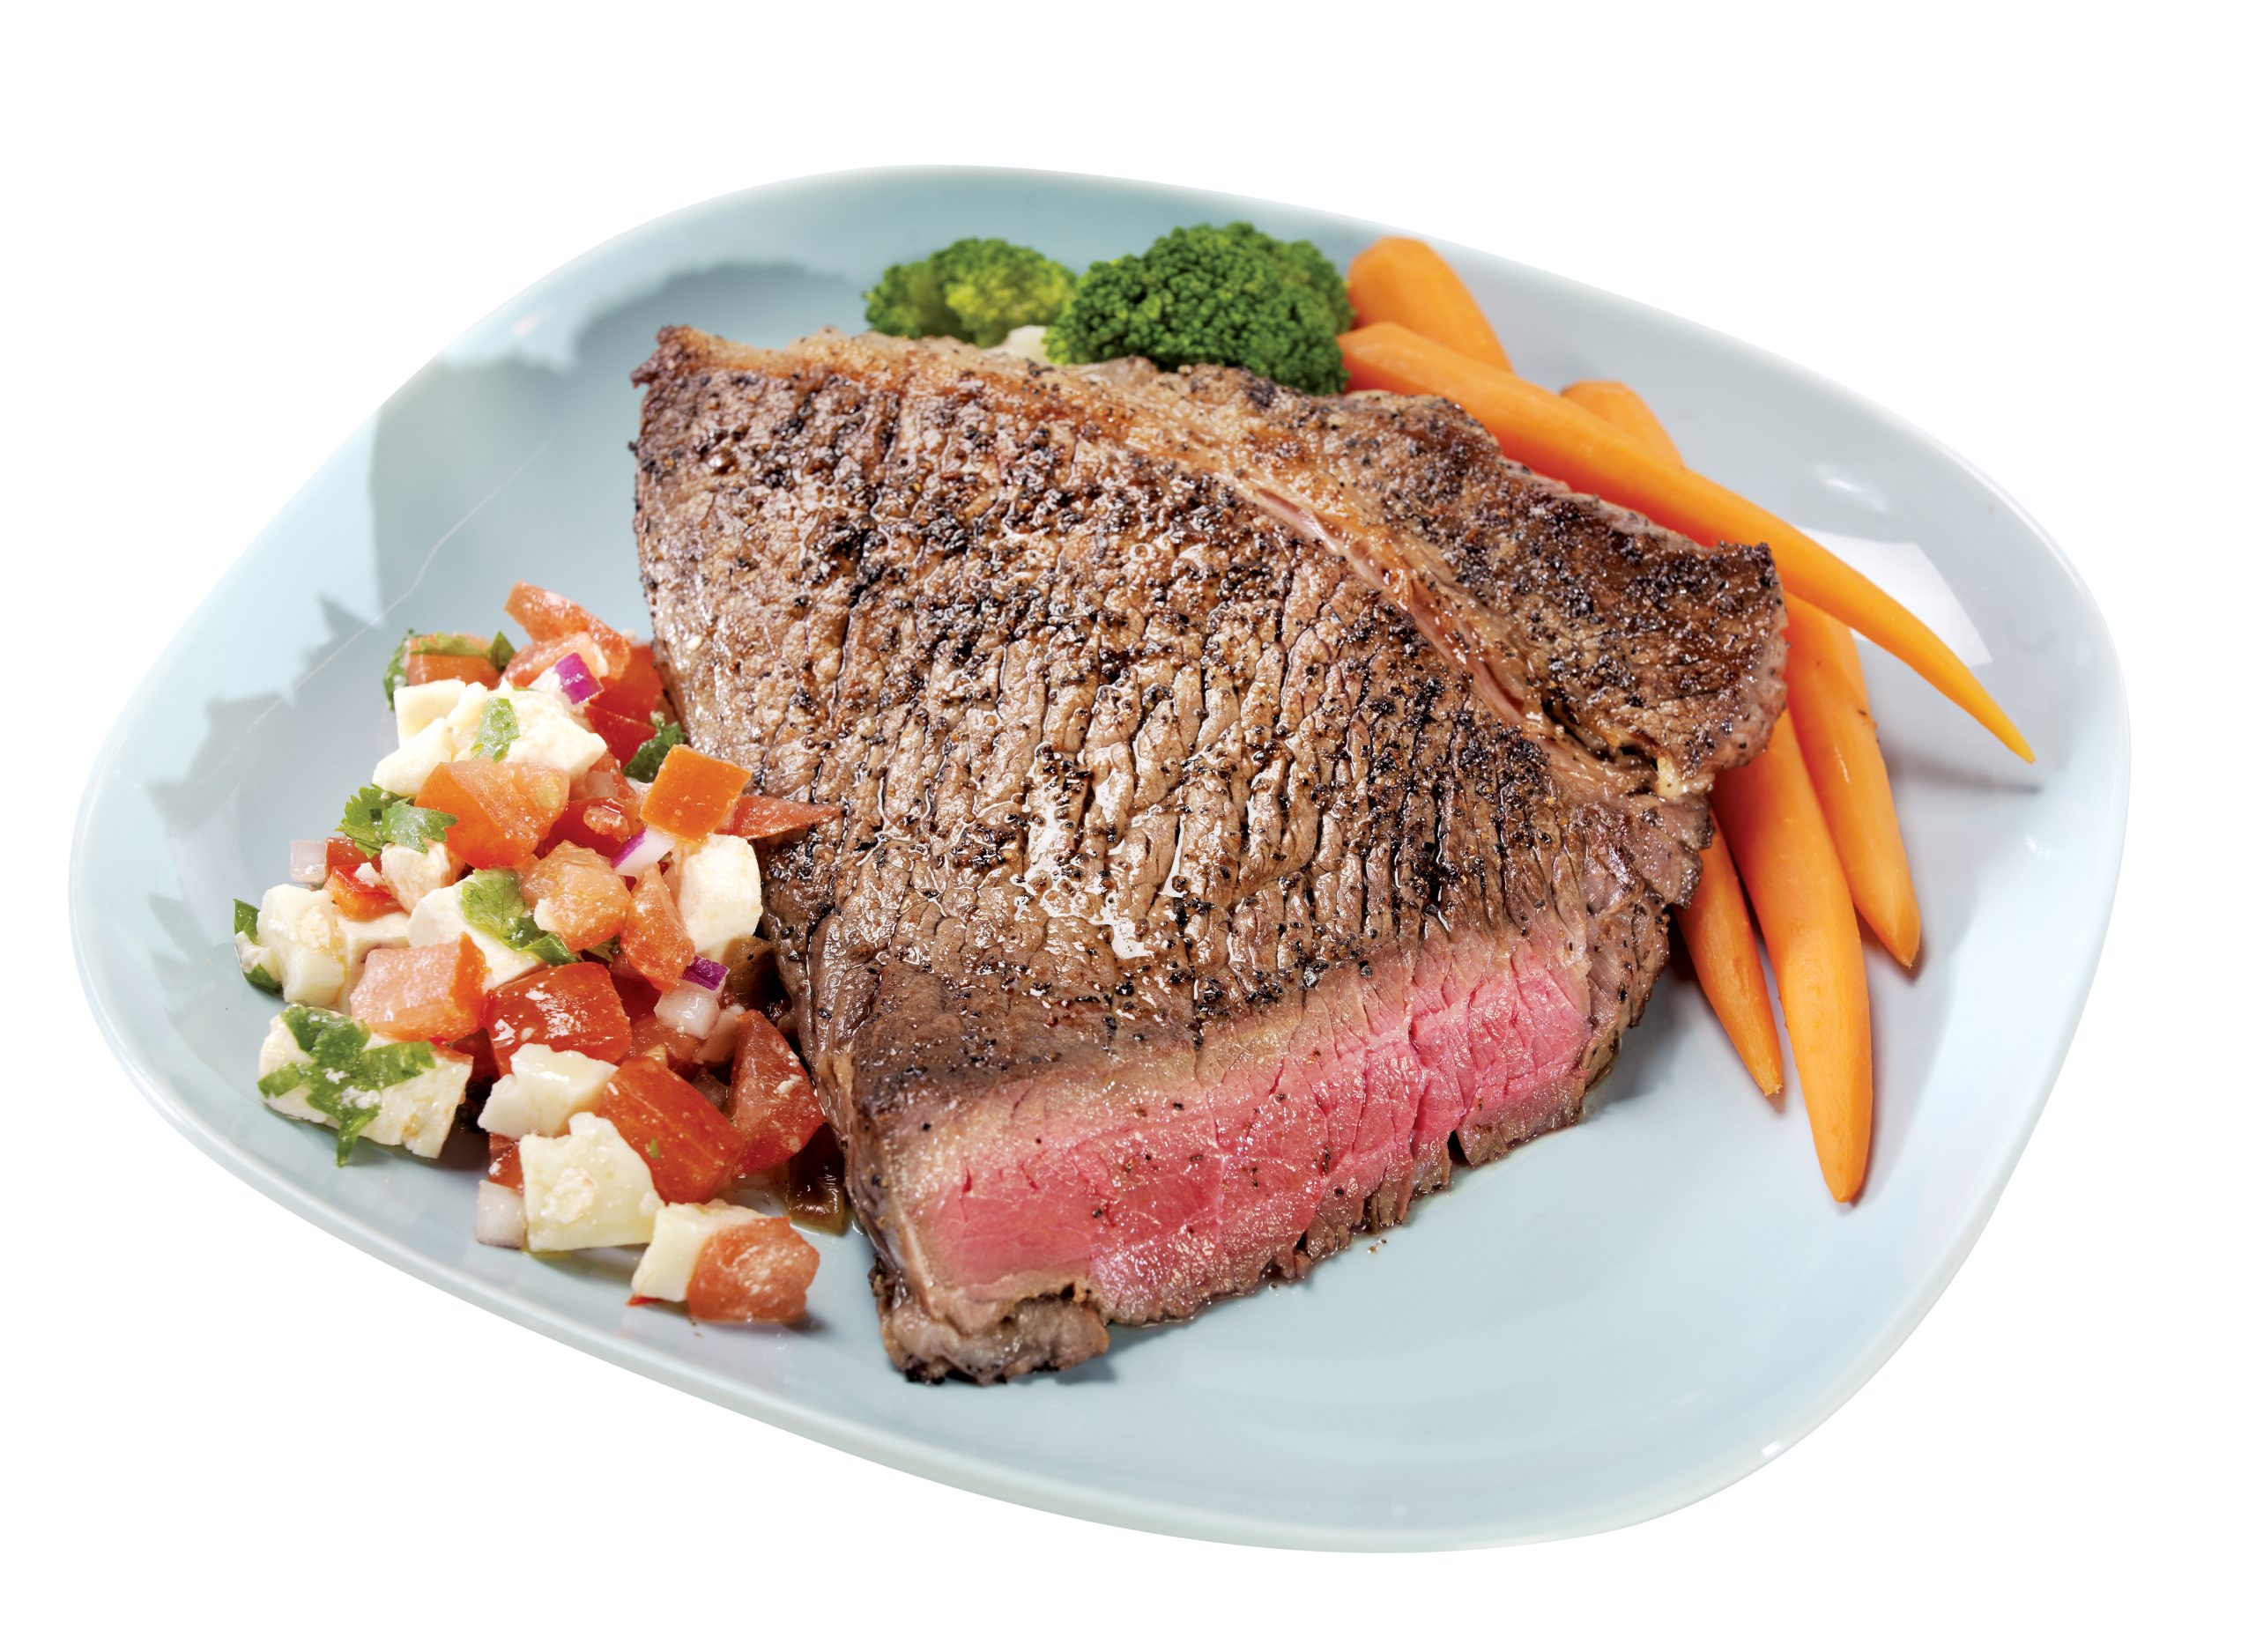 Beef Top Round Steak with Carrots on a Plate Food Picture